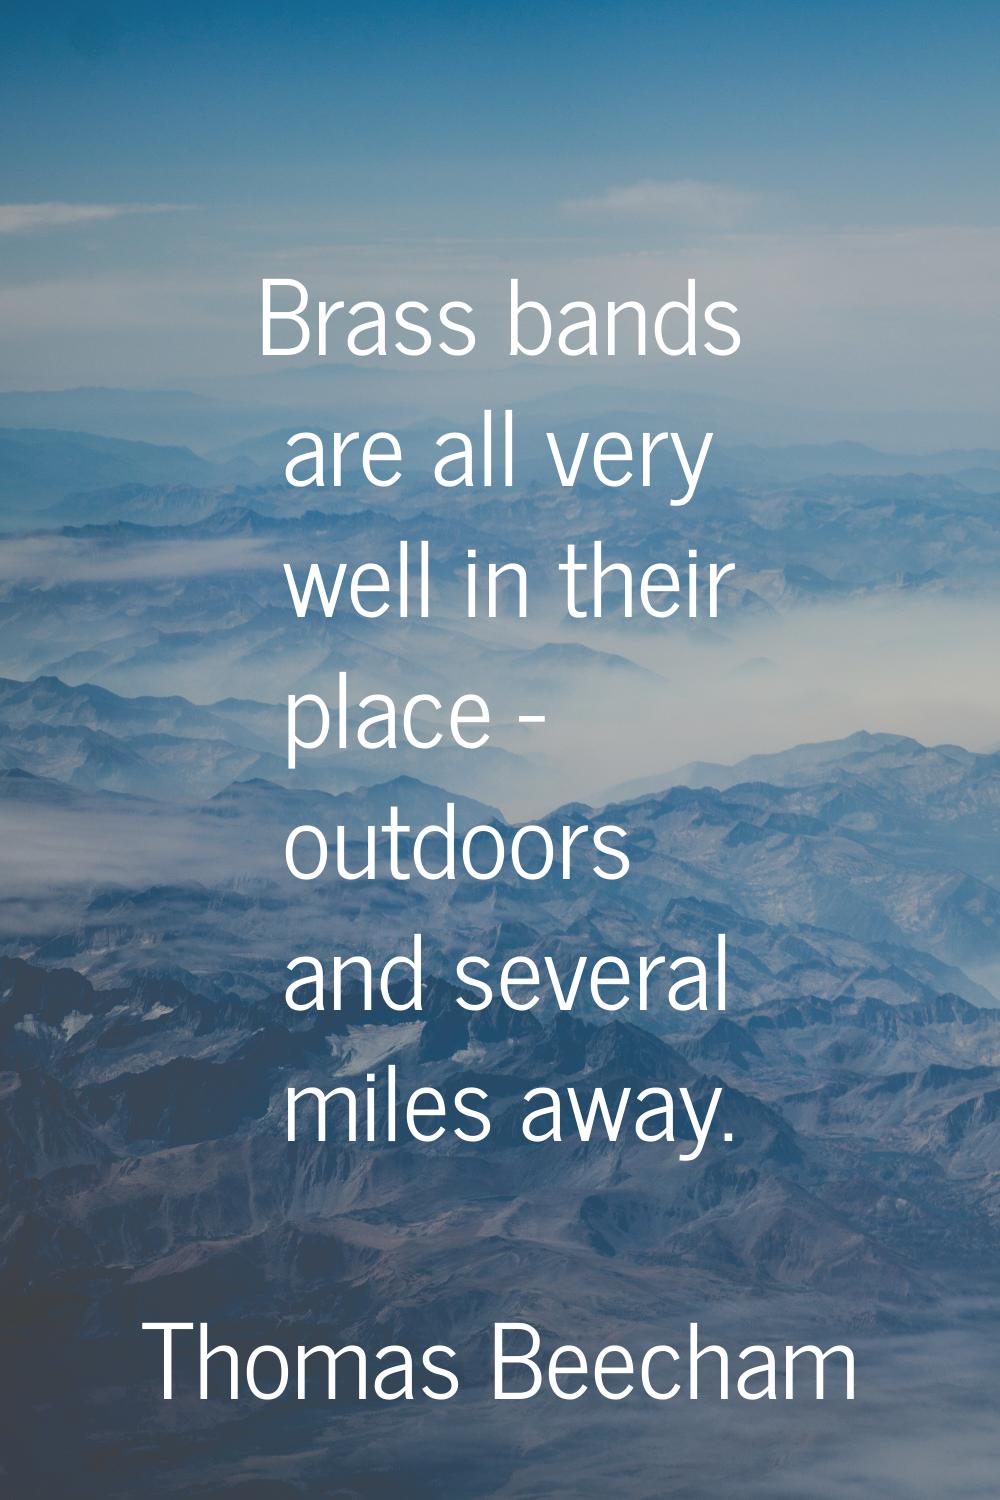 Brass bands are all very well in their place - outdoors and several miles away.